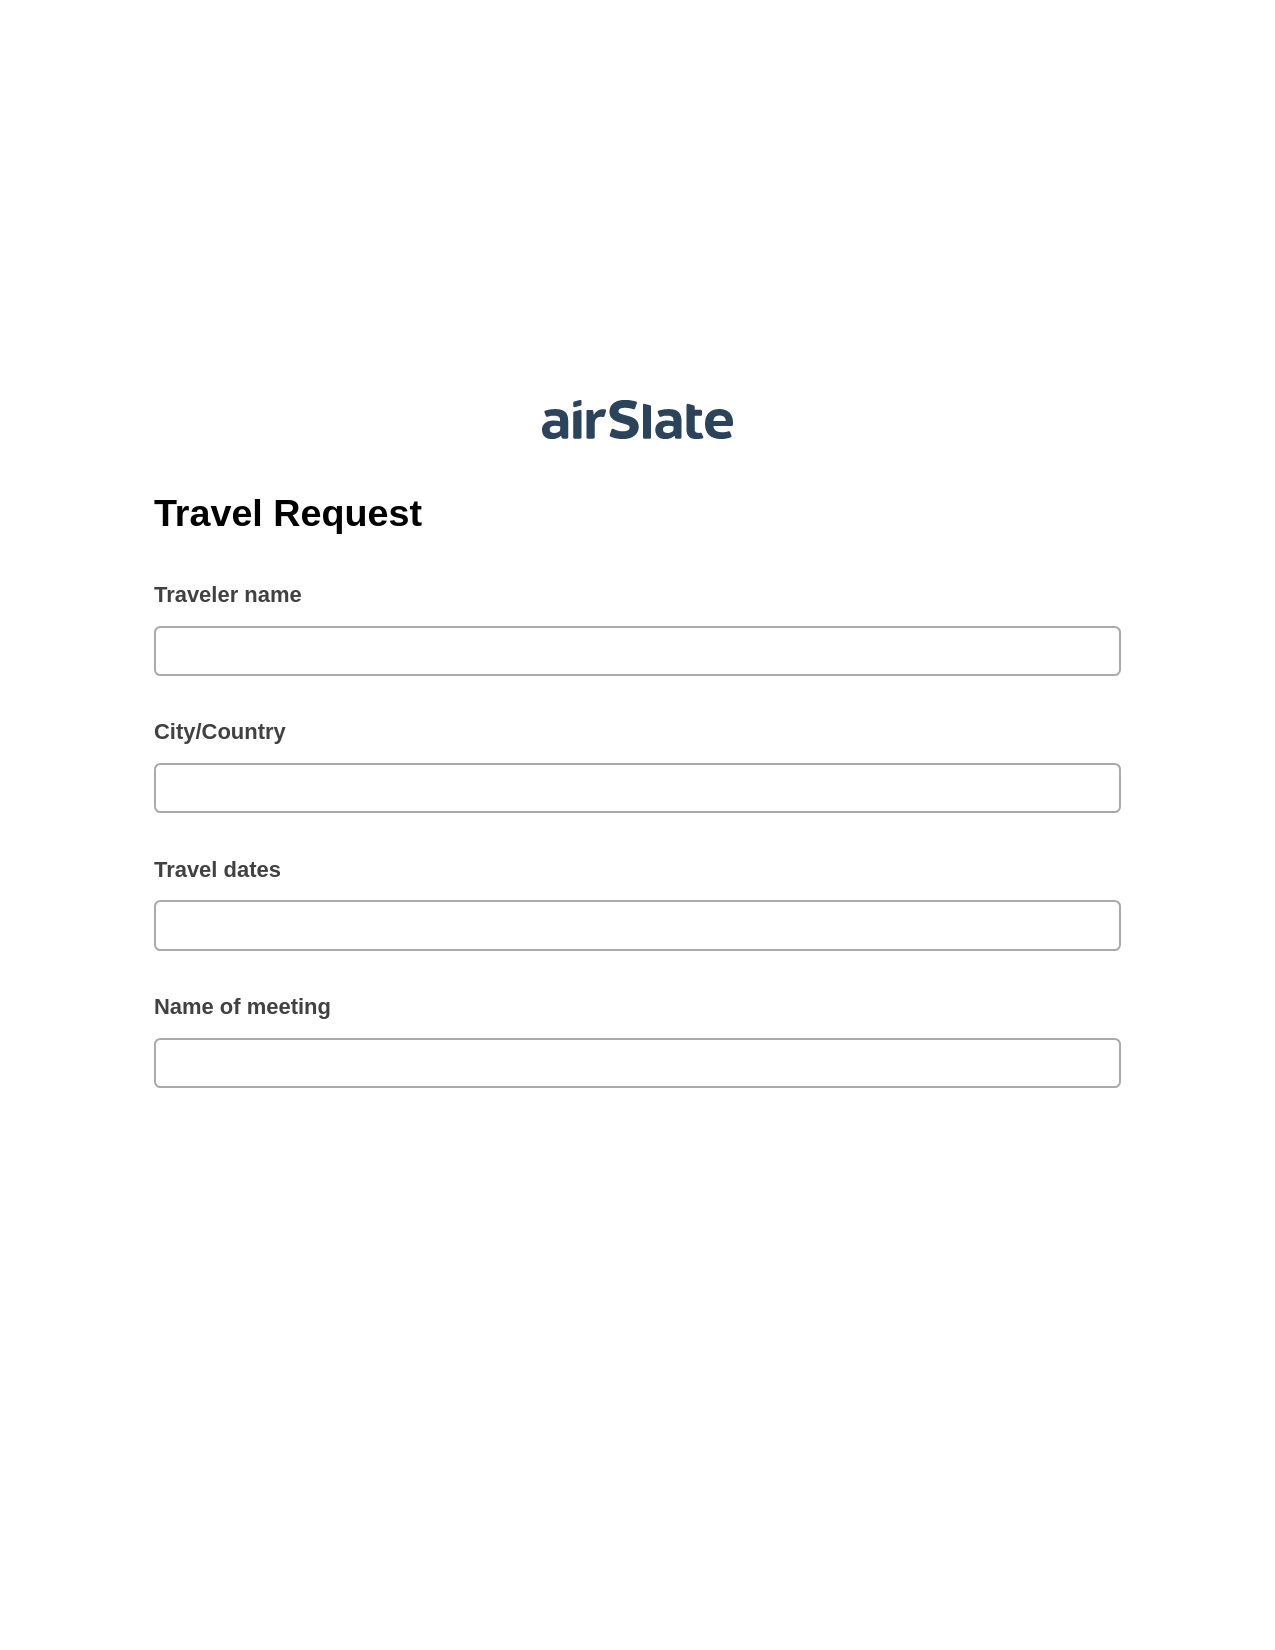 Travel Request Pre-fill from CSV File Bot, Reminder Bot, Google Drive Bot